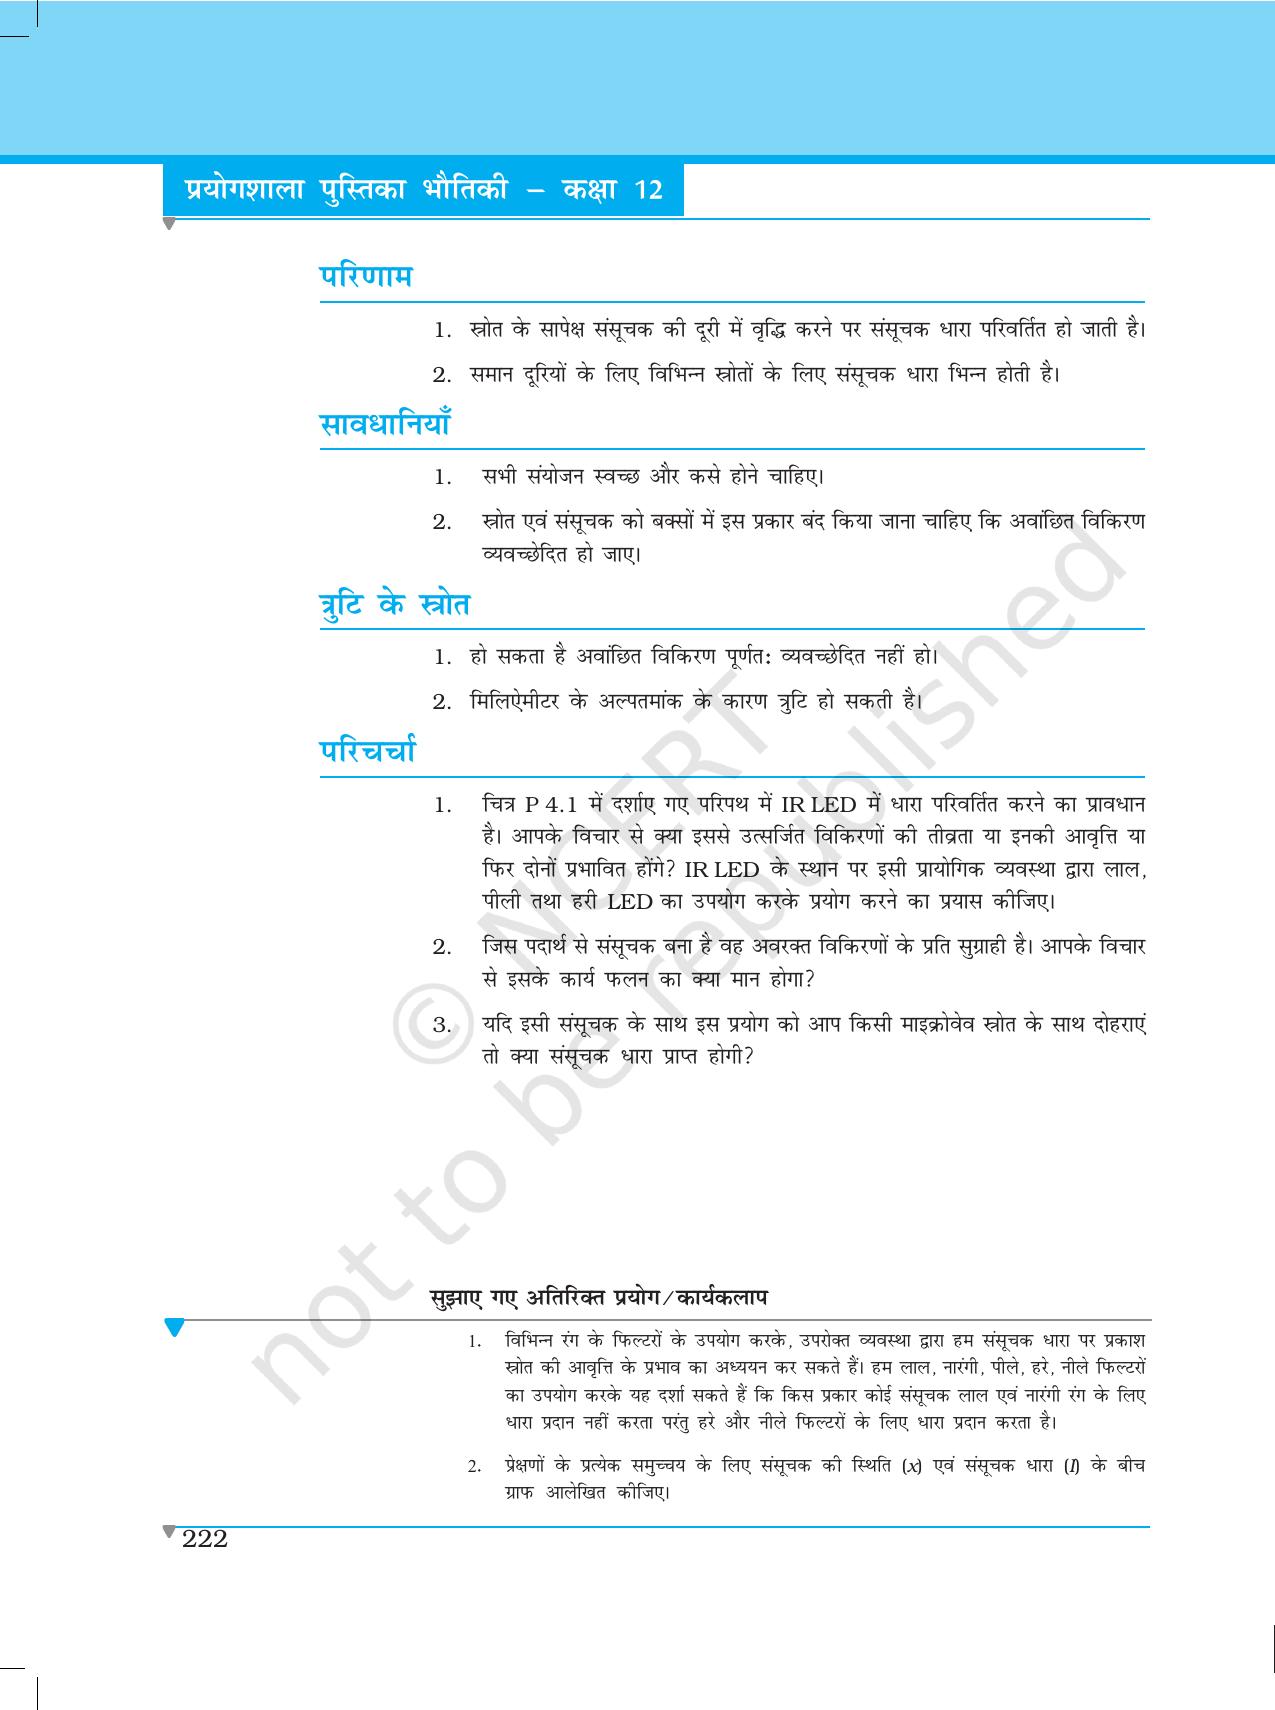 NCERT Laboratory Manuals for Class XII भौतिकी - परियोजना (1 - 7) - Page 16